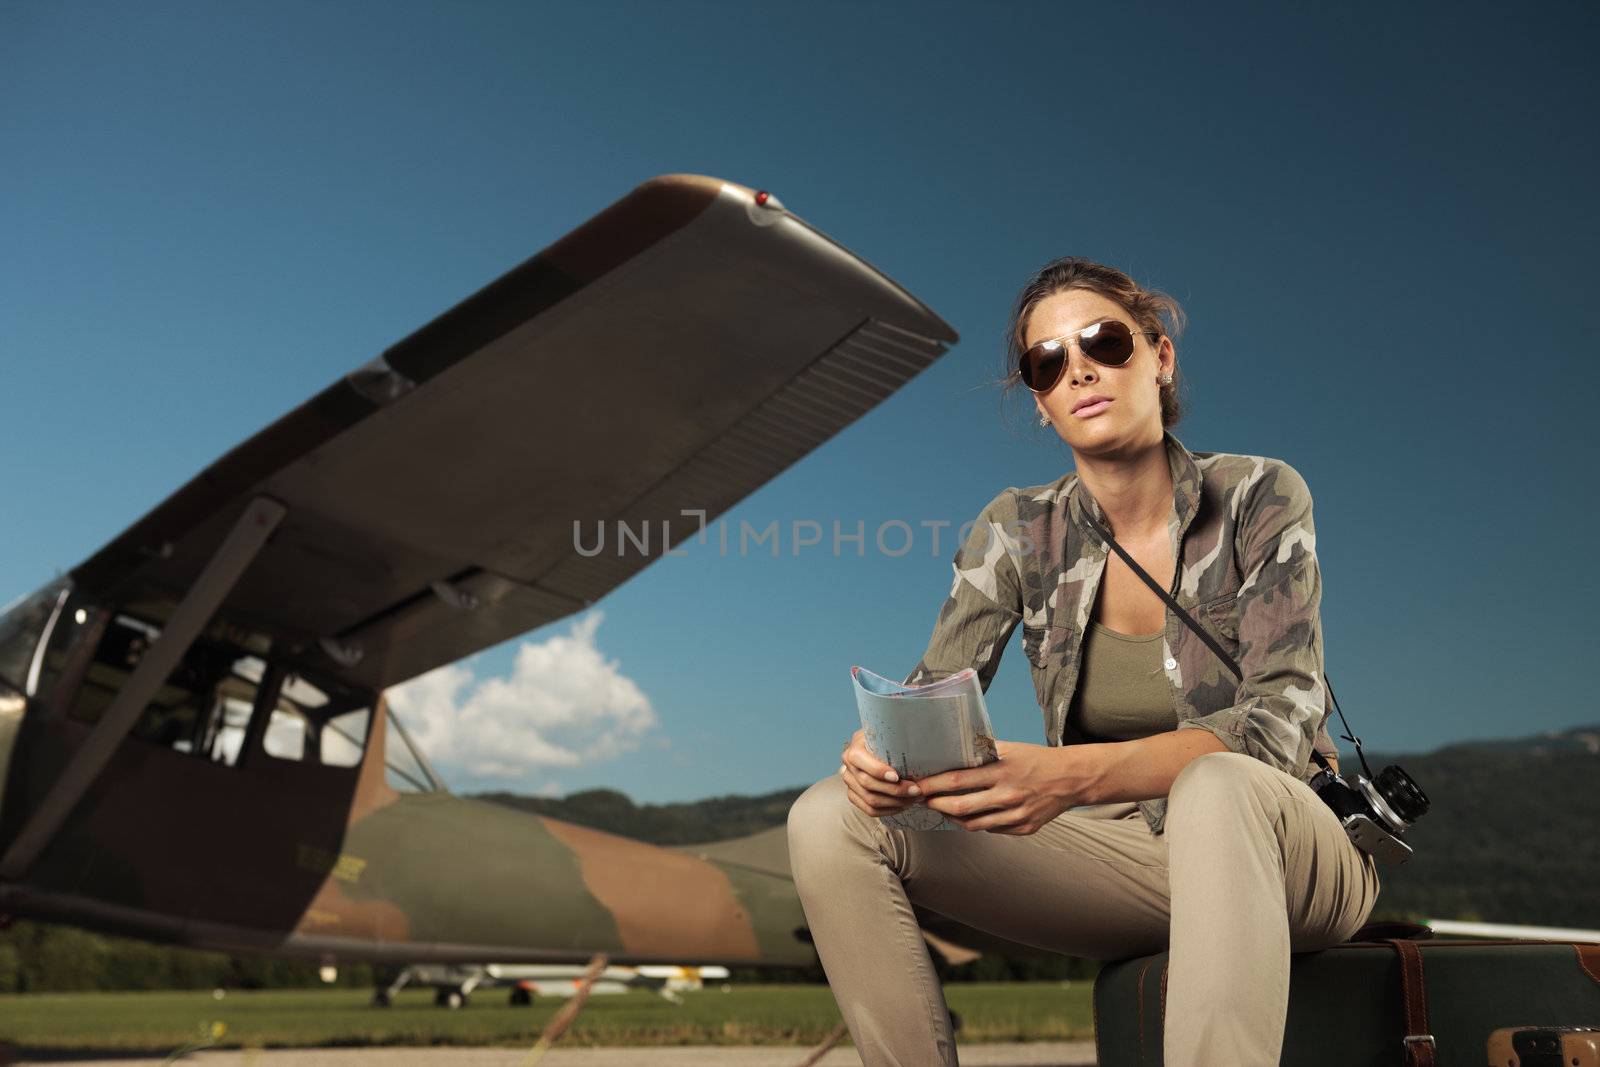 Beautiful young woman sitting on a suitcase at the airport. Airplane in the background